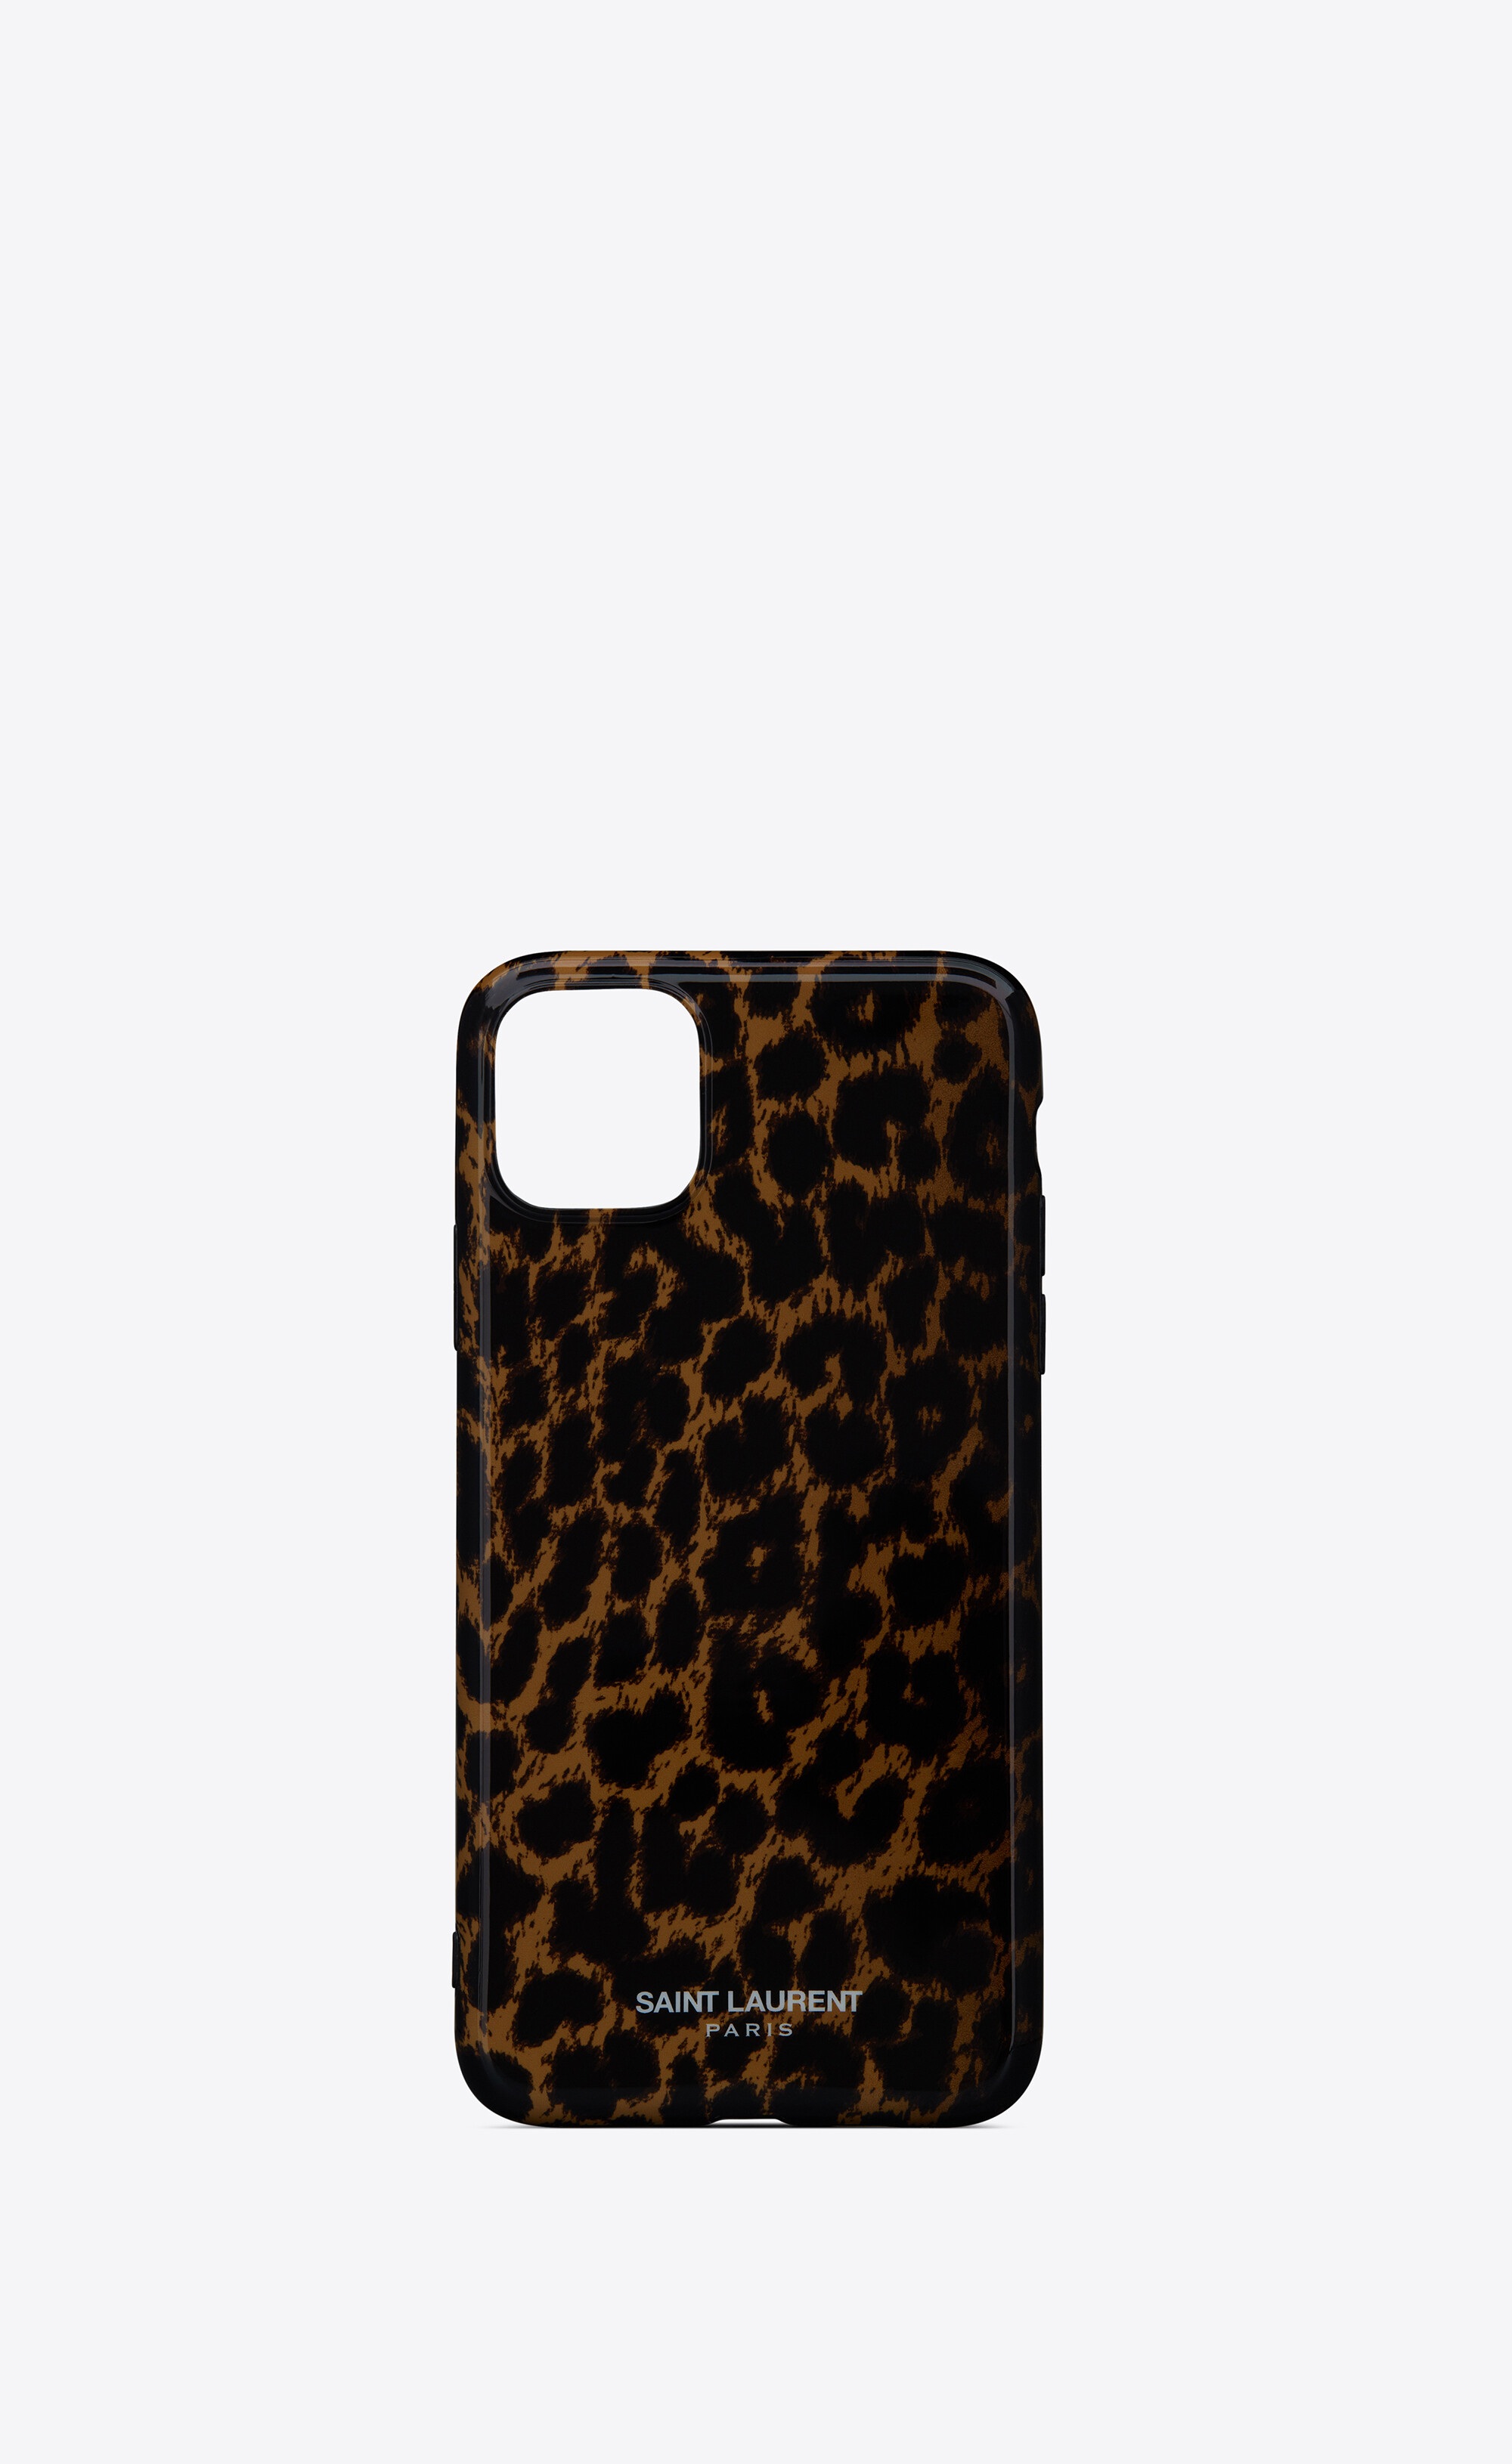 iphone 12 pro max case in leopard printed silicone